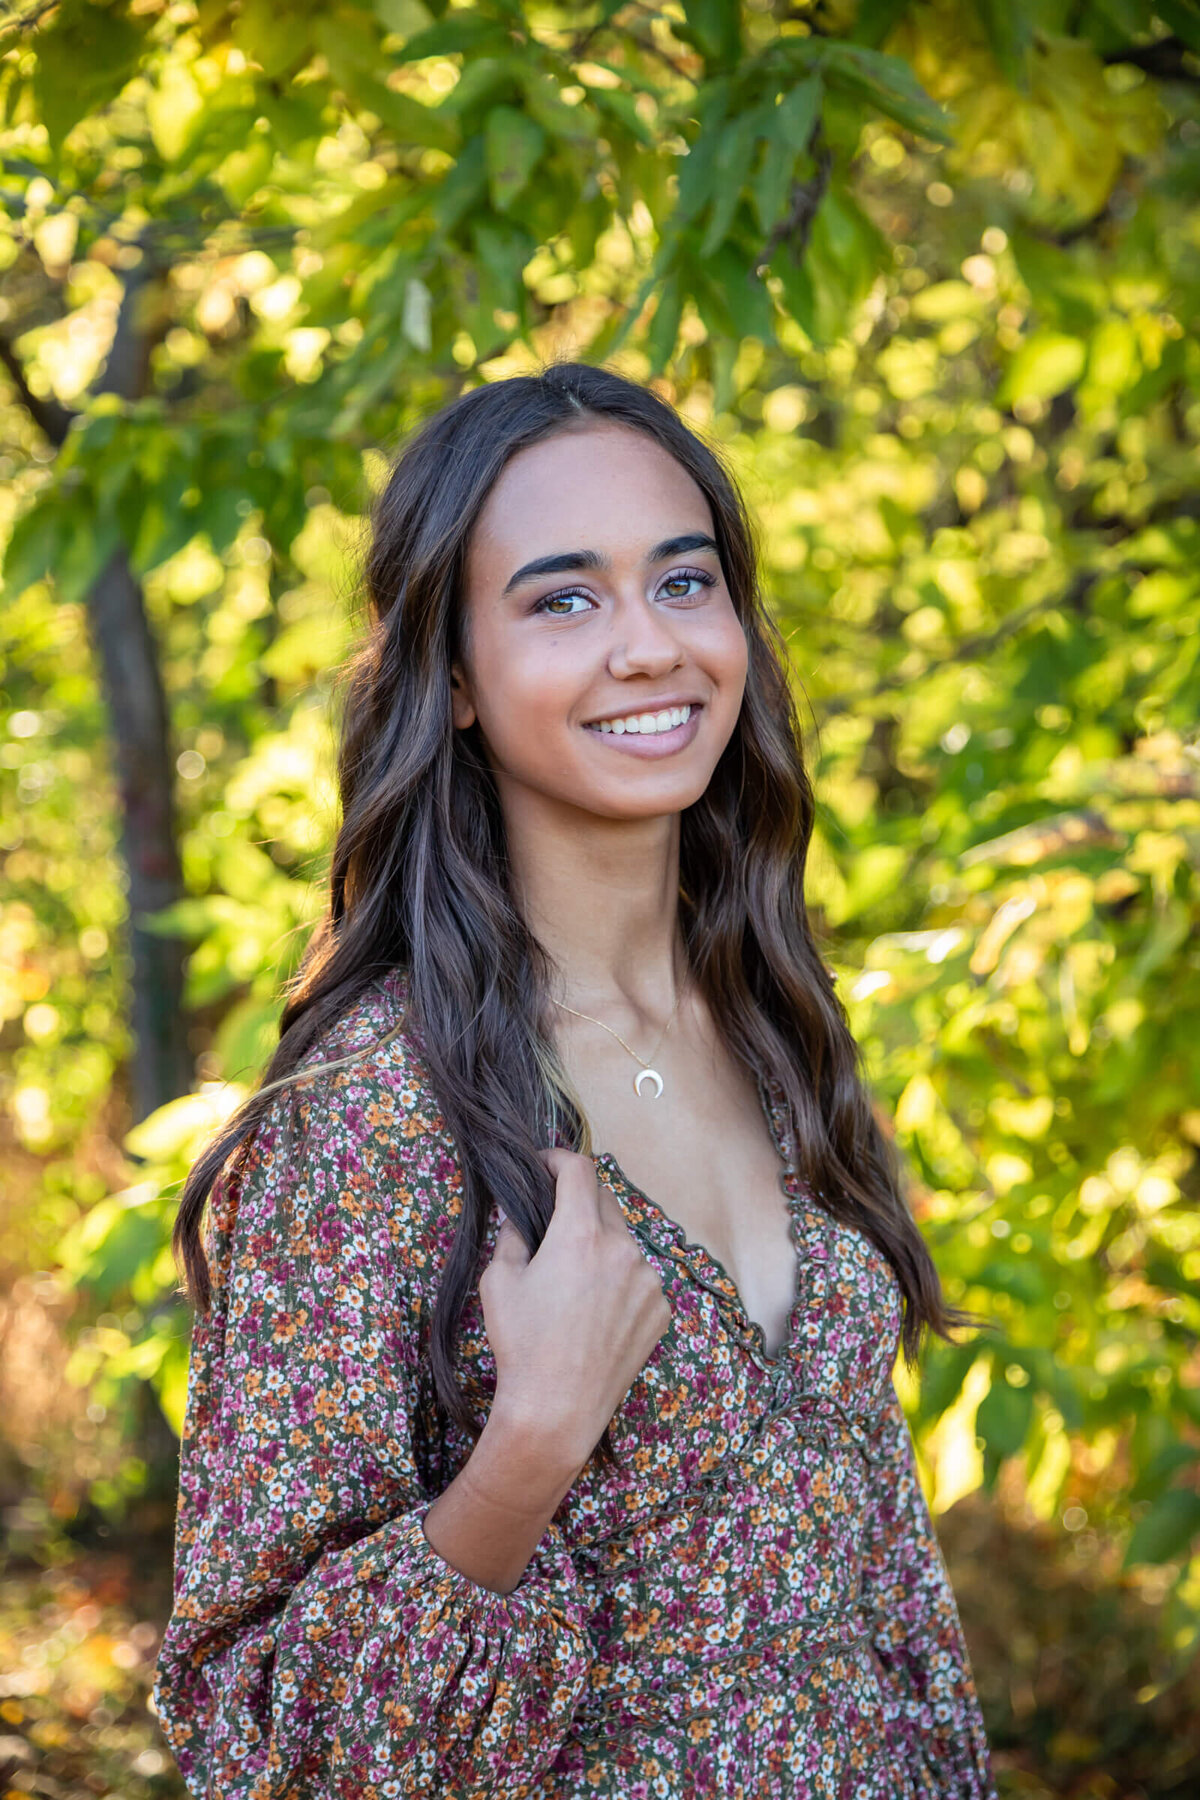 A stunning dark haired teenage girl poses for a senior picture in a brown floral dress surrounded by green leaves. Captured by senior photographer Dynae Levingston.